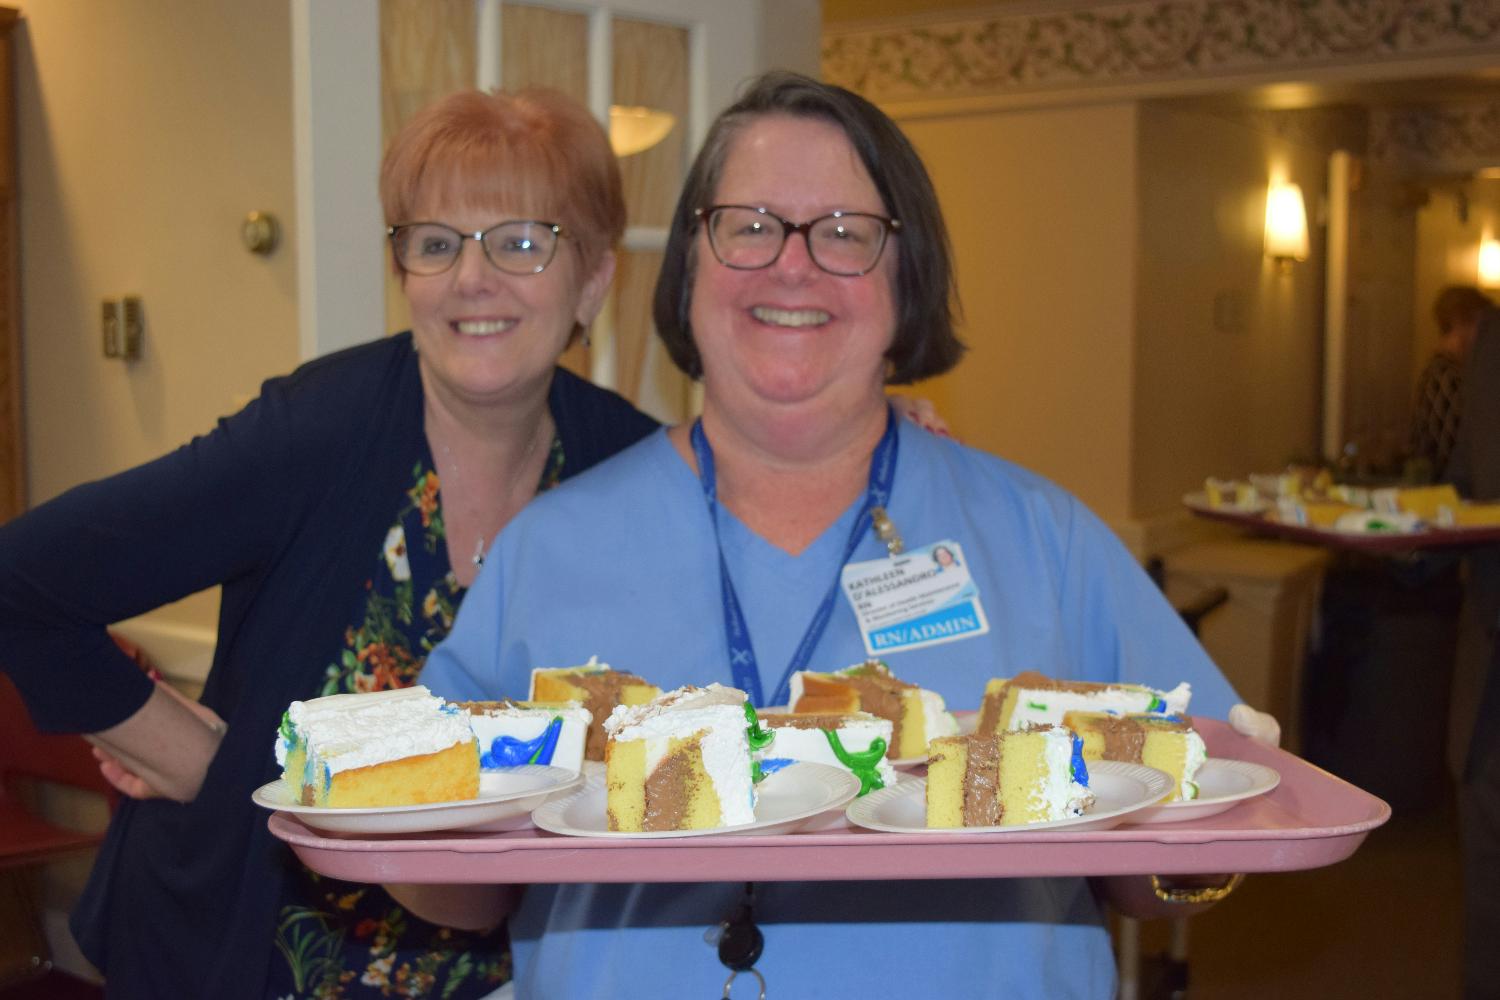 Staff get in on the fun by serving cake to residents at a party.